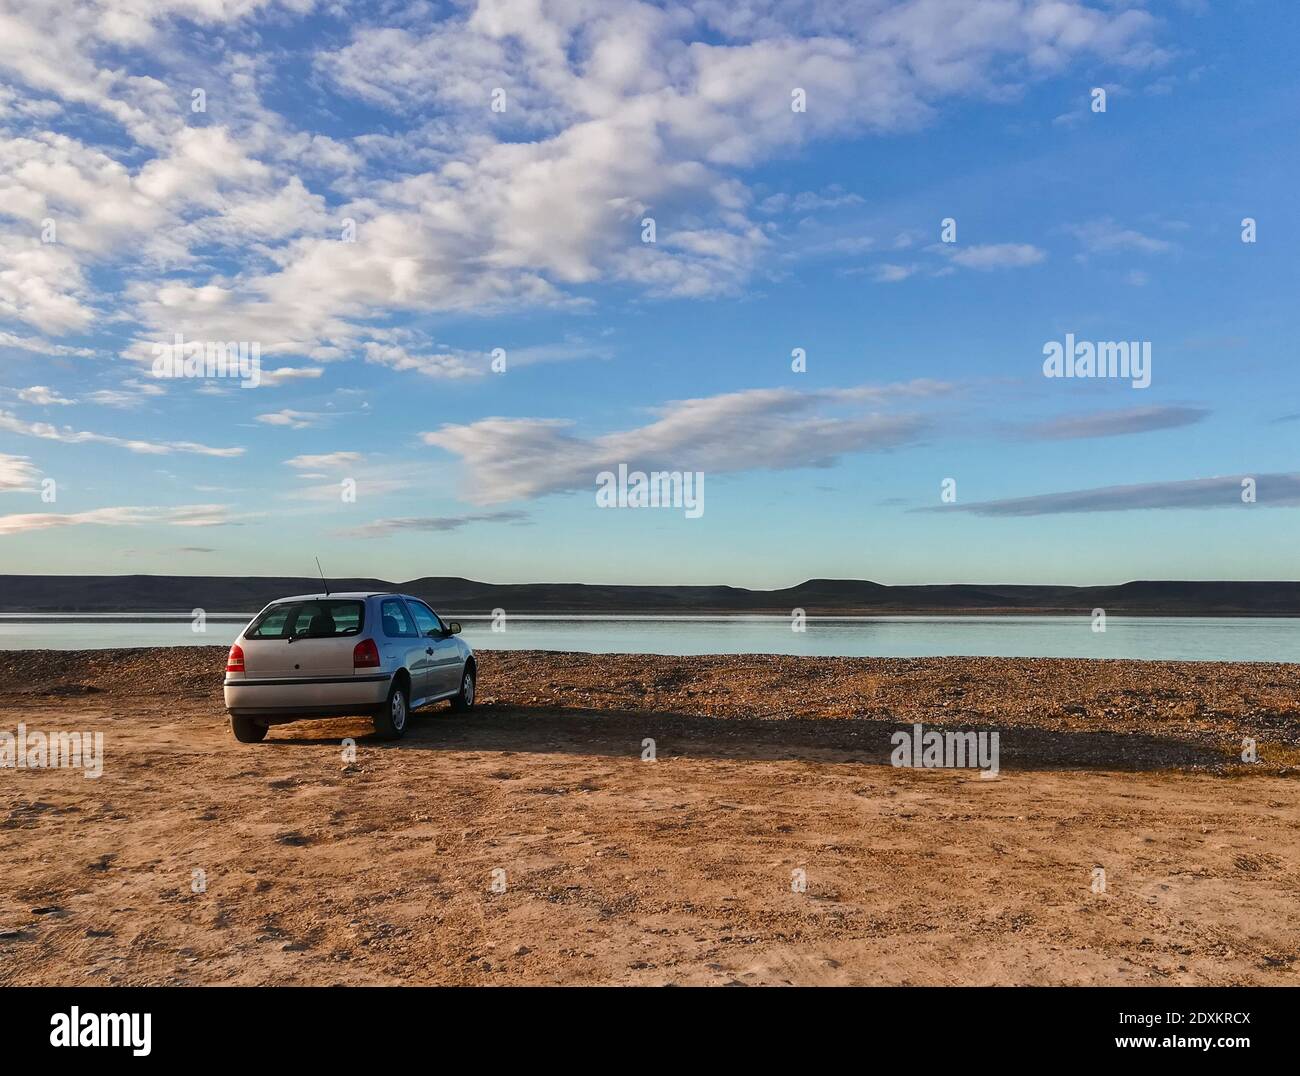 RIO GA, ARGENTINA - Sep 08, 2019: beautiful landscape and car without recognizable marks or information, coastline with water view, mountains, brown l Stock Photo